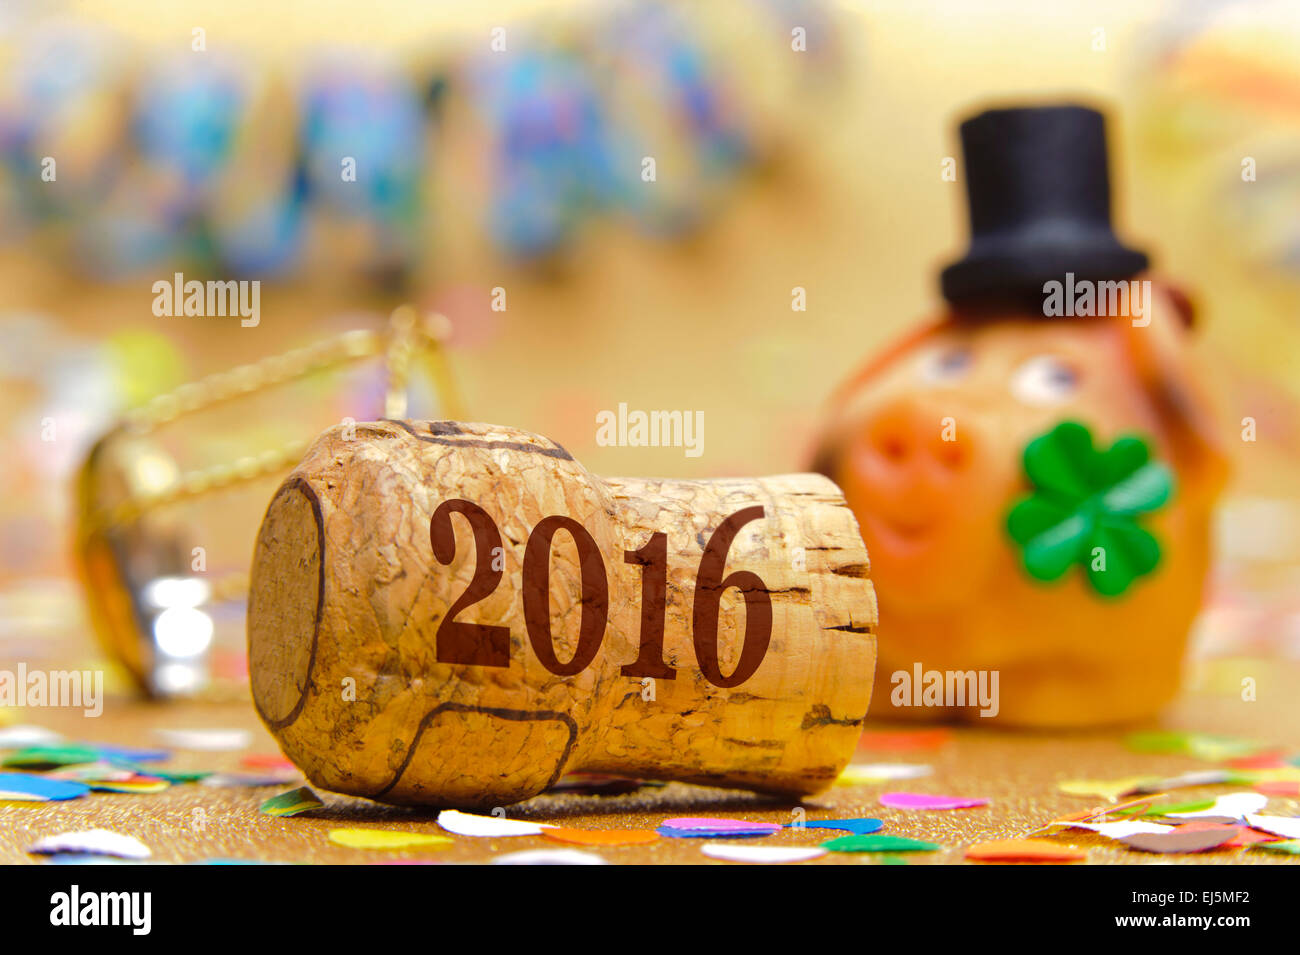 Happy new year 2016 with pig made with marzipan as lucky charm Stock Photo